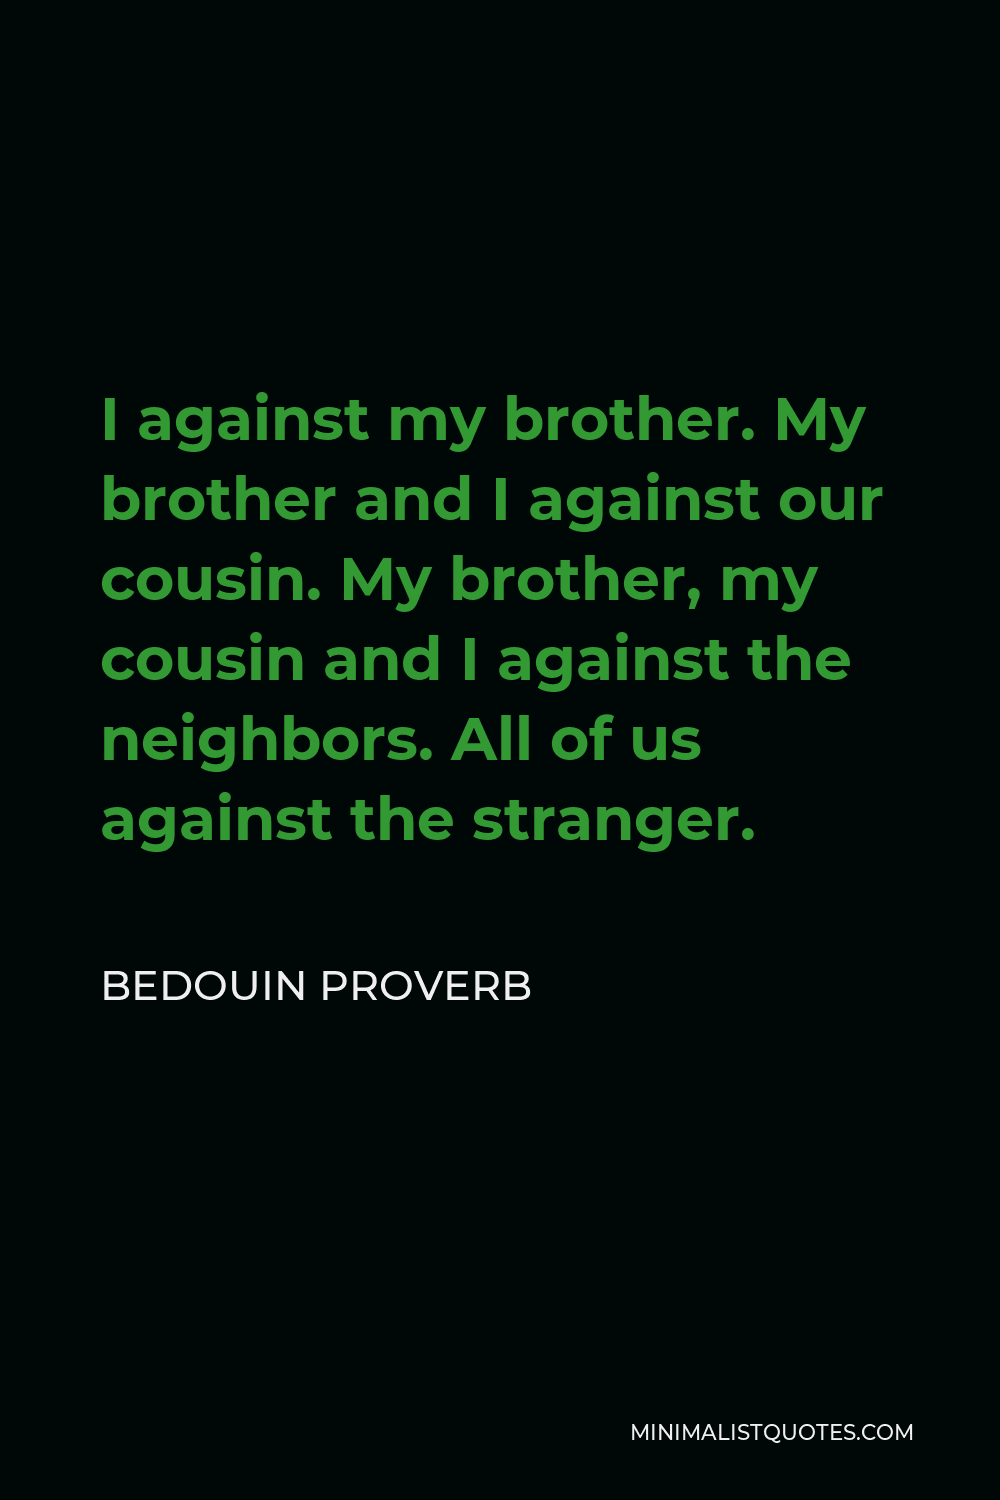 Bedouin Proverb Quote - I against my brother. My brother and I against our cousin. My brother, my cousin and I against the neighbors. All of us against the stranger.